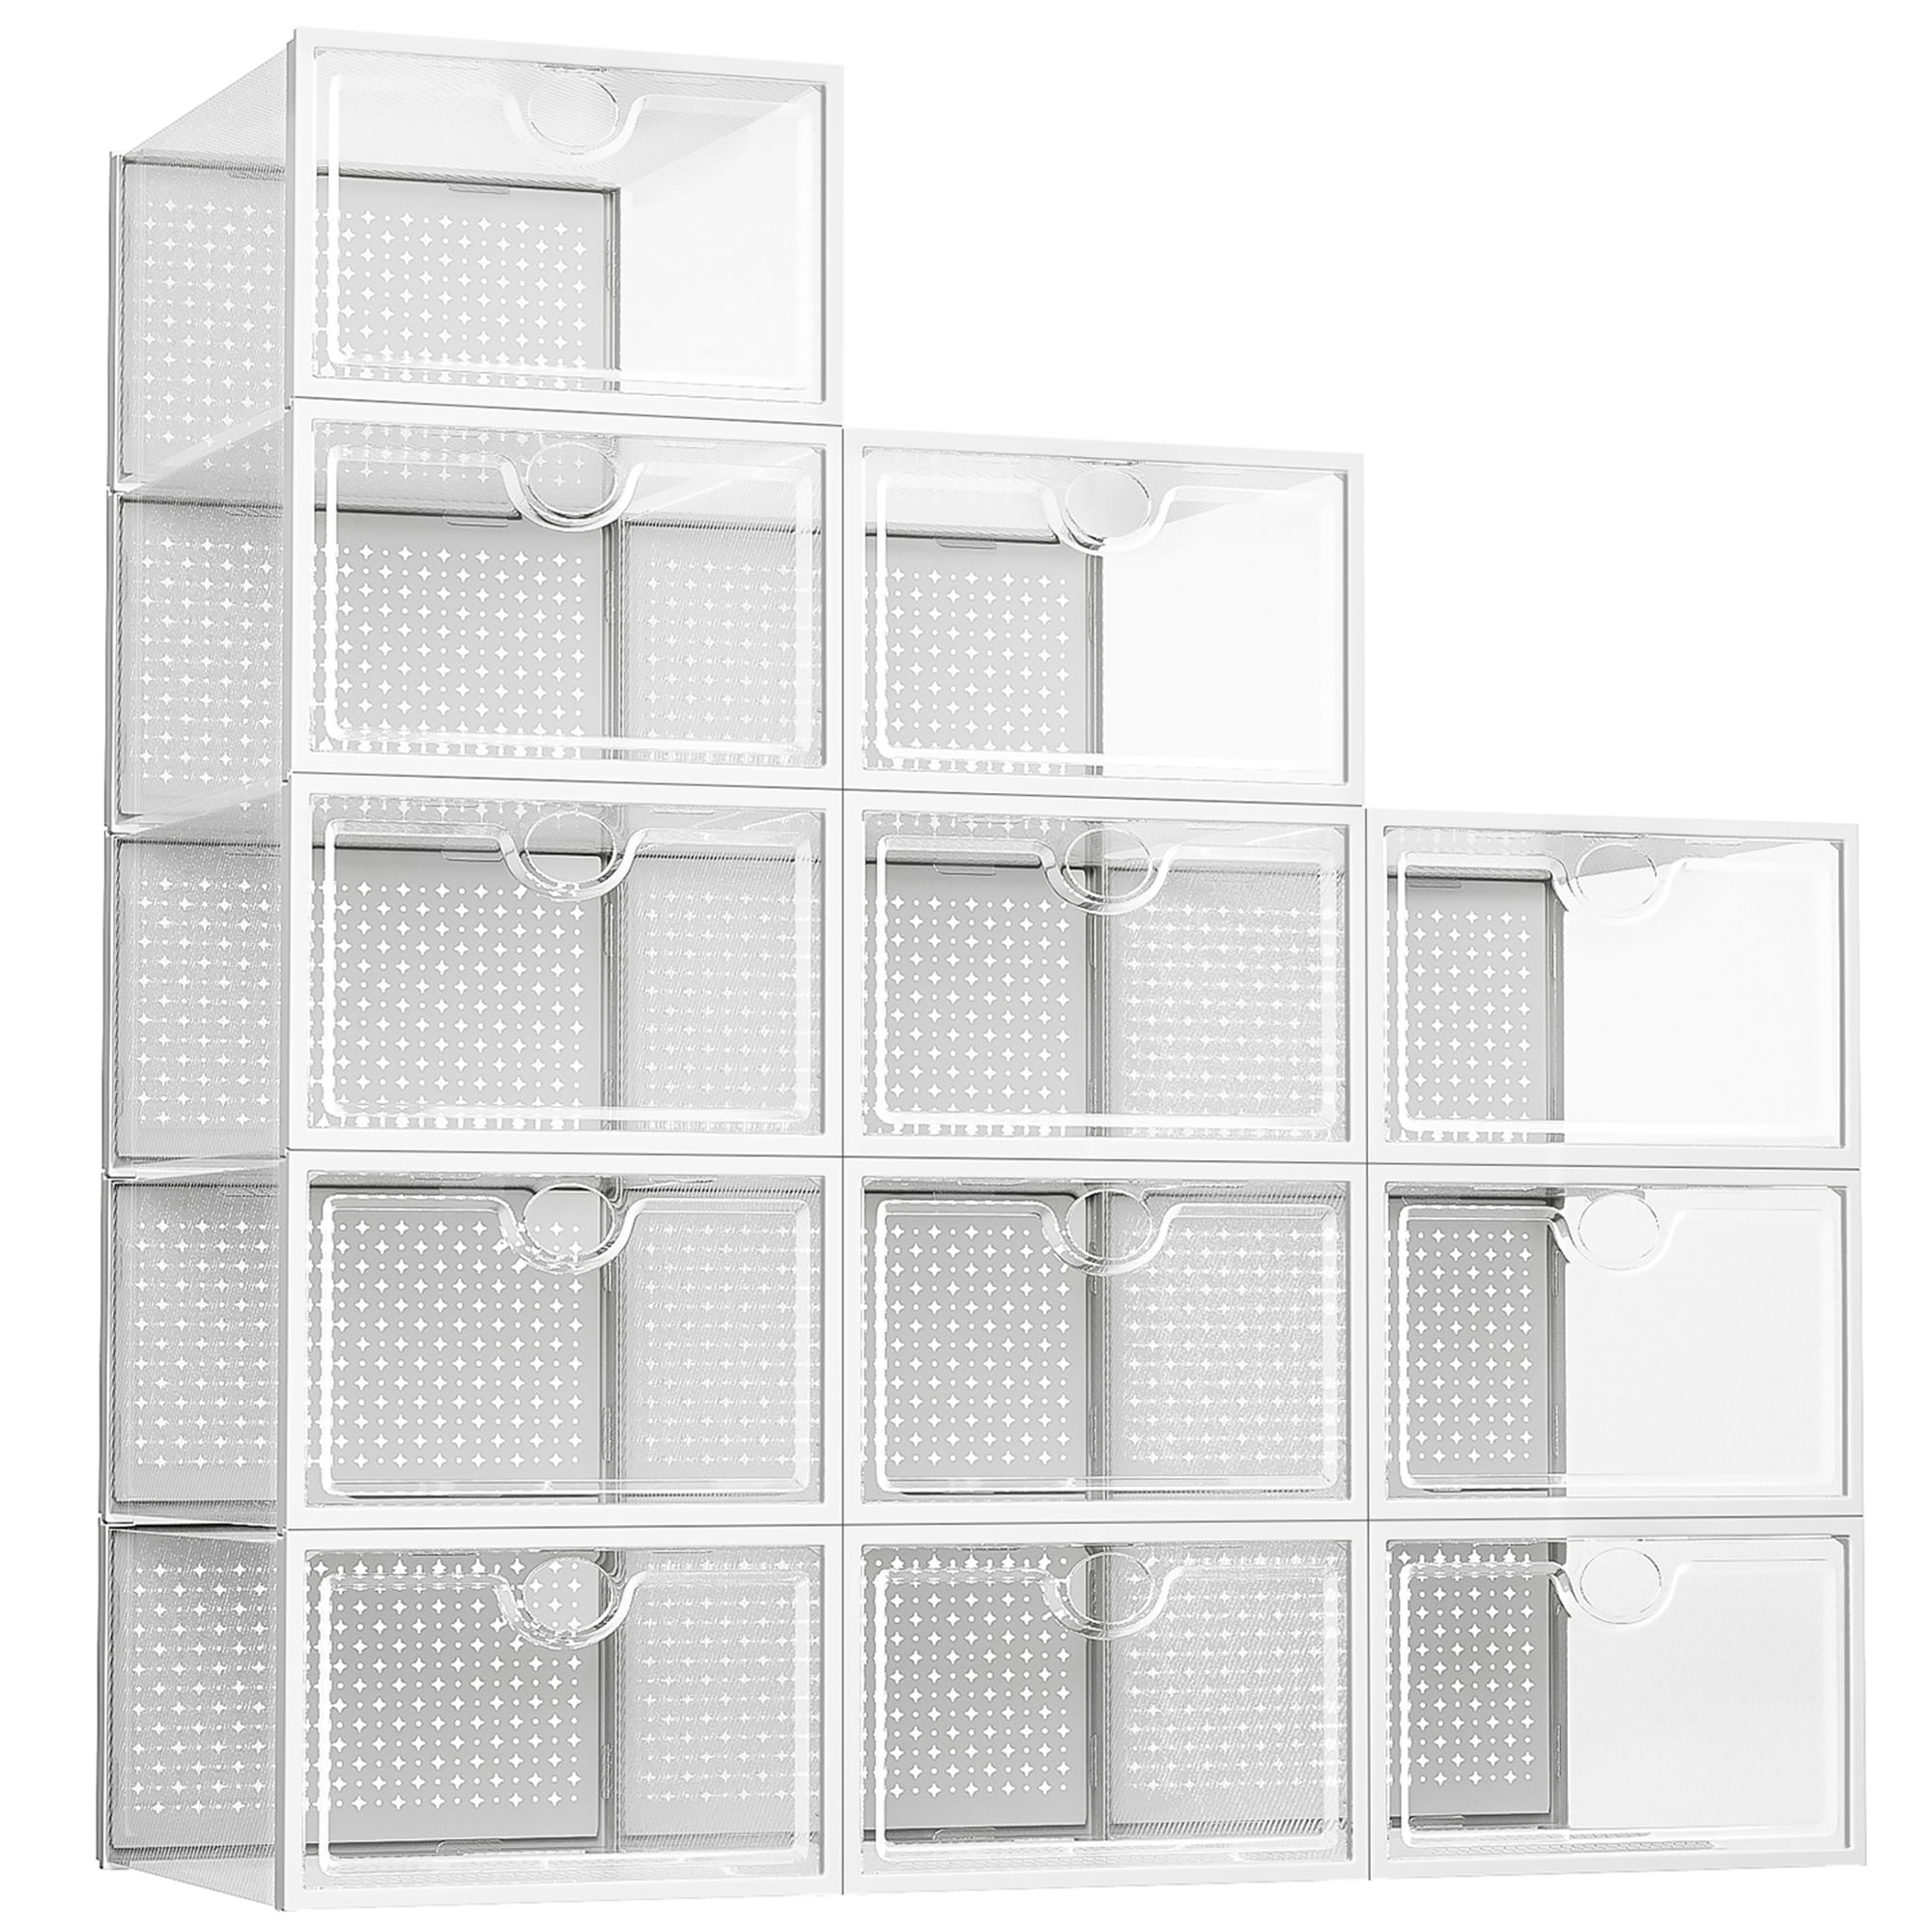 Pinkpum Clear Shoe Boxes Stackable, 12 Pack x-Large Shoe Storage Boxes ...